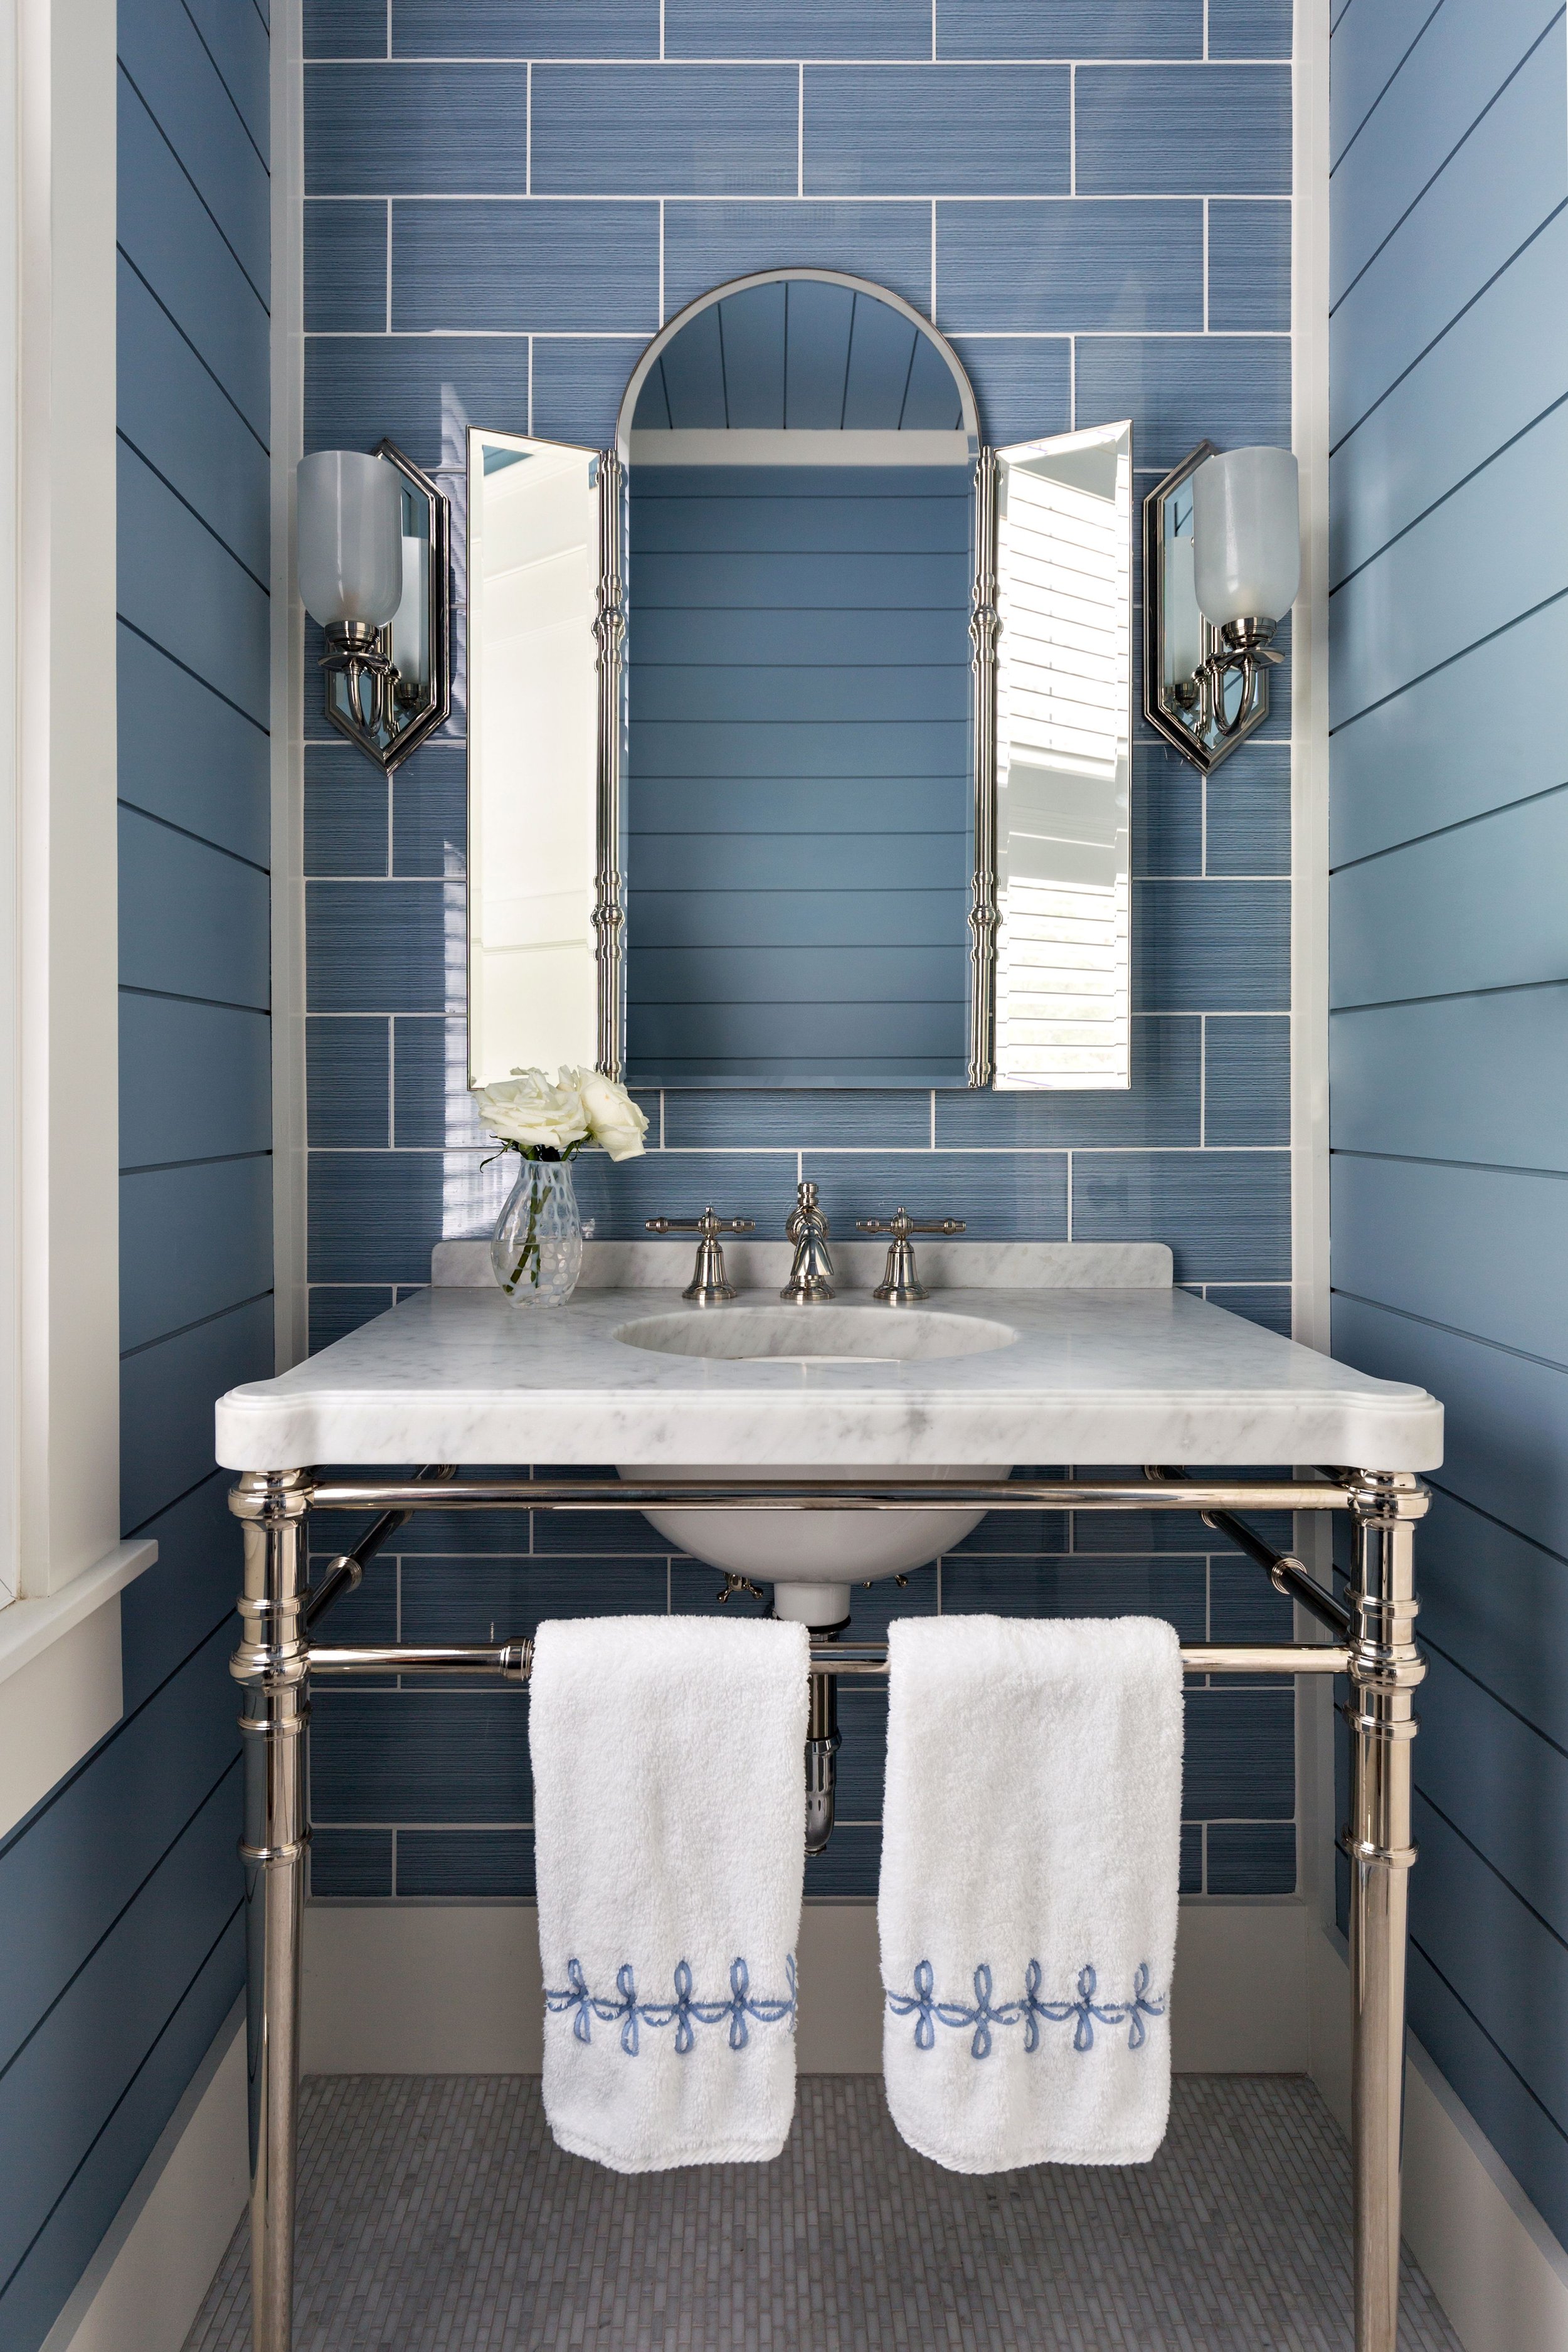 Swath a bathroom in Dusky Blue 1640 and bring to mind the light of late August’s fading hydrangeas.